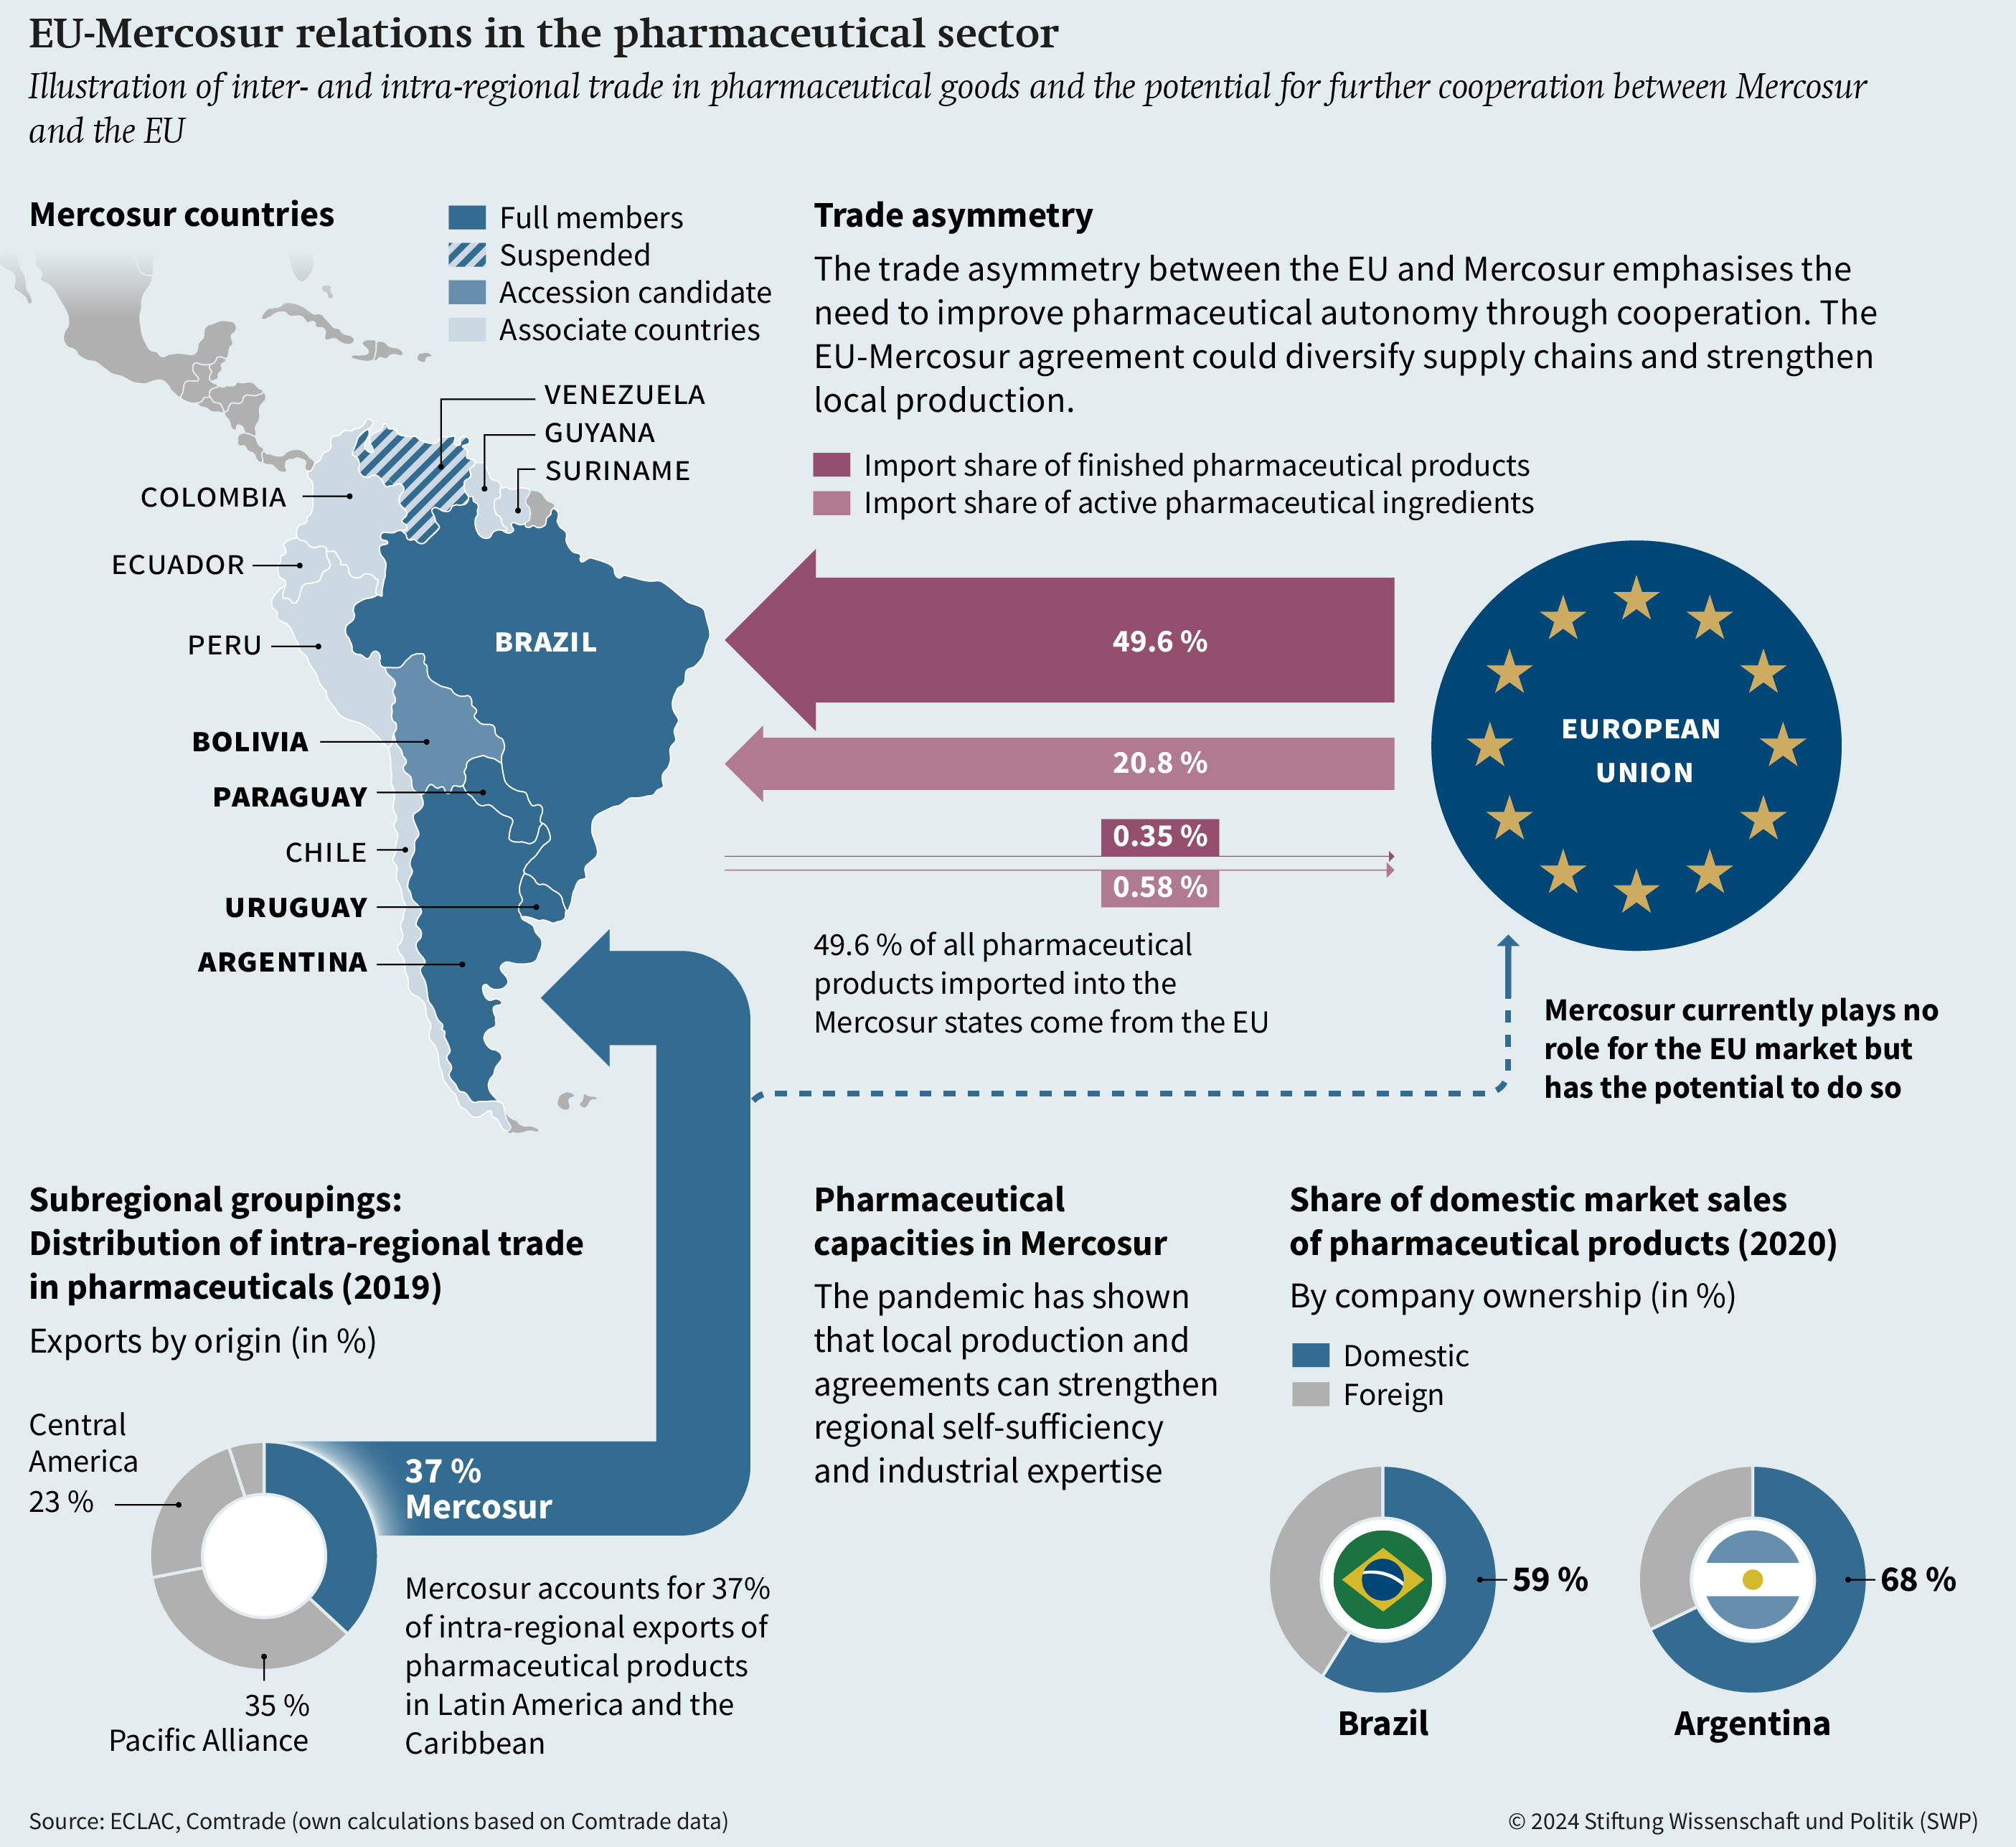 Figure: EU-Mercosur relations in the pharmaceutical sector